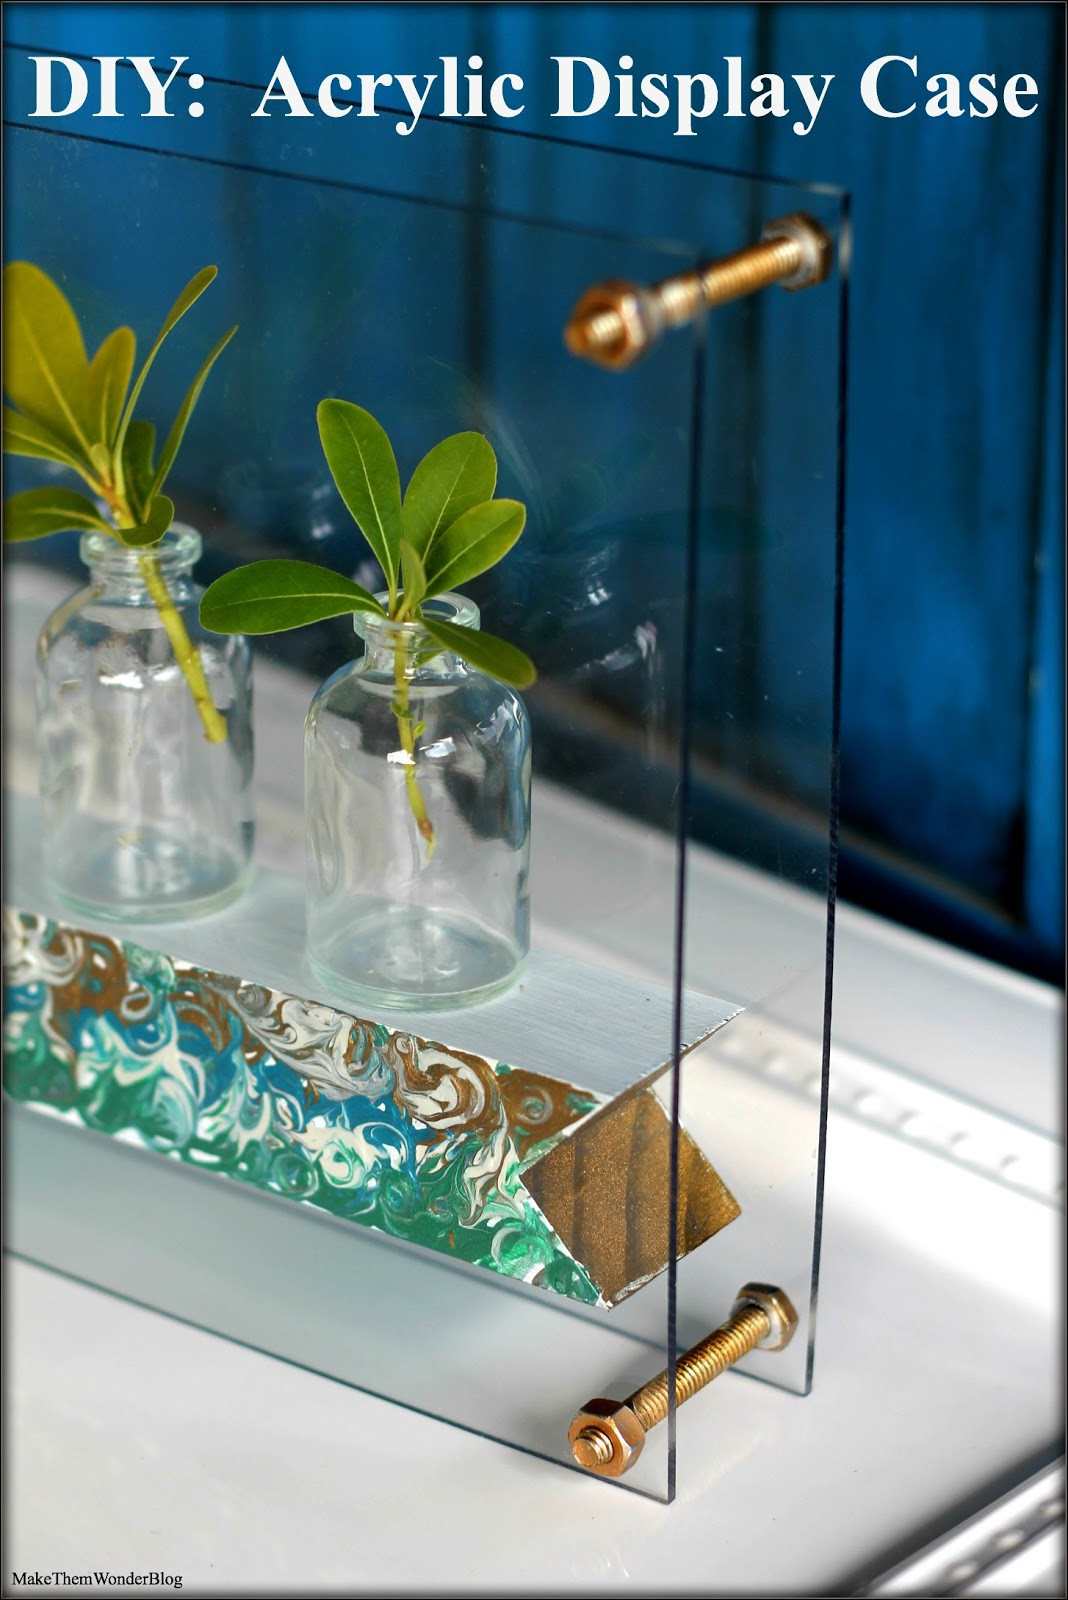 Best ideas about DIY Display Cases
. Save or Pin Make Them Wonder DIY Acrylic Display Case Now.